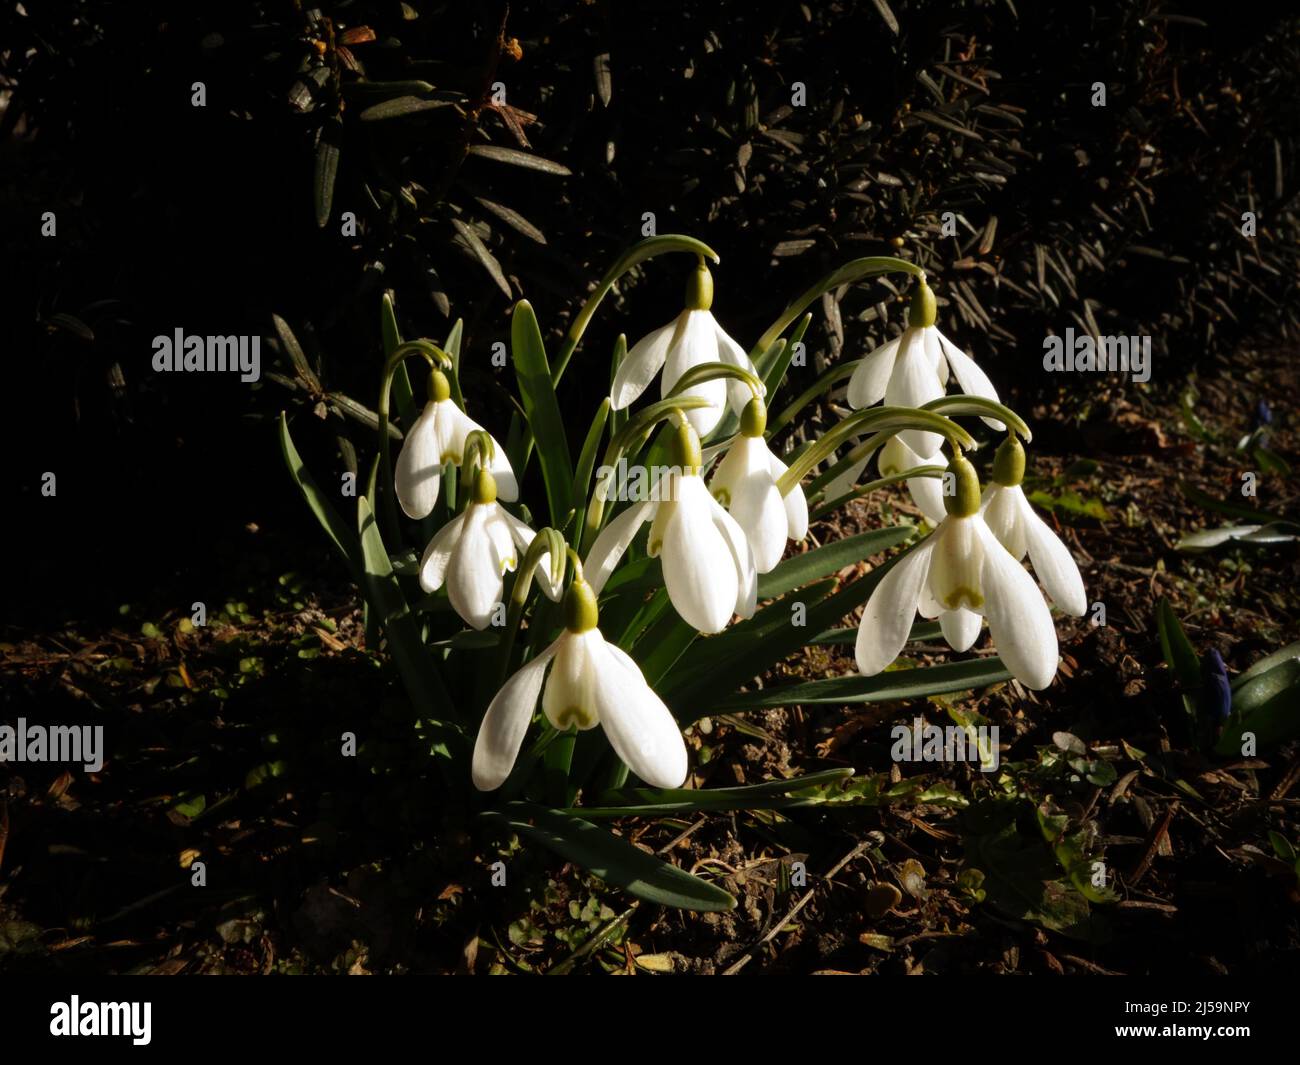 As the first flower that comes when the snow thaws, the Snowdrop has become a symbol of a new beginning, innocence, purity and hope. Stock Photo